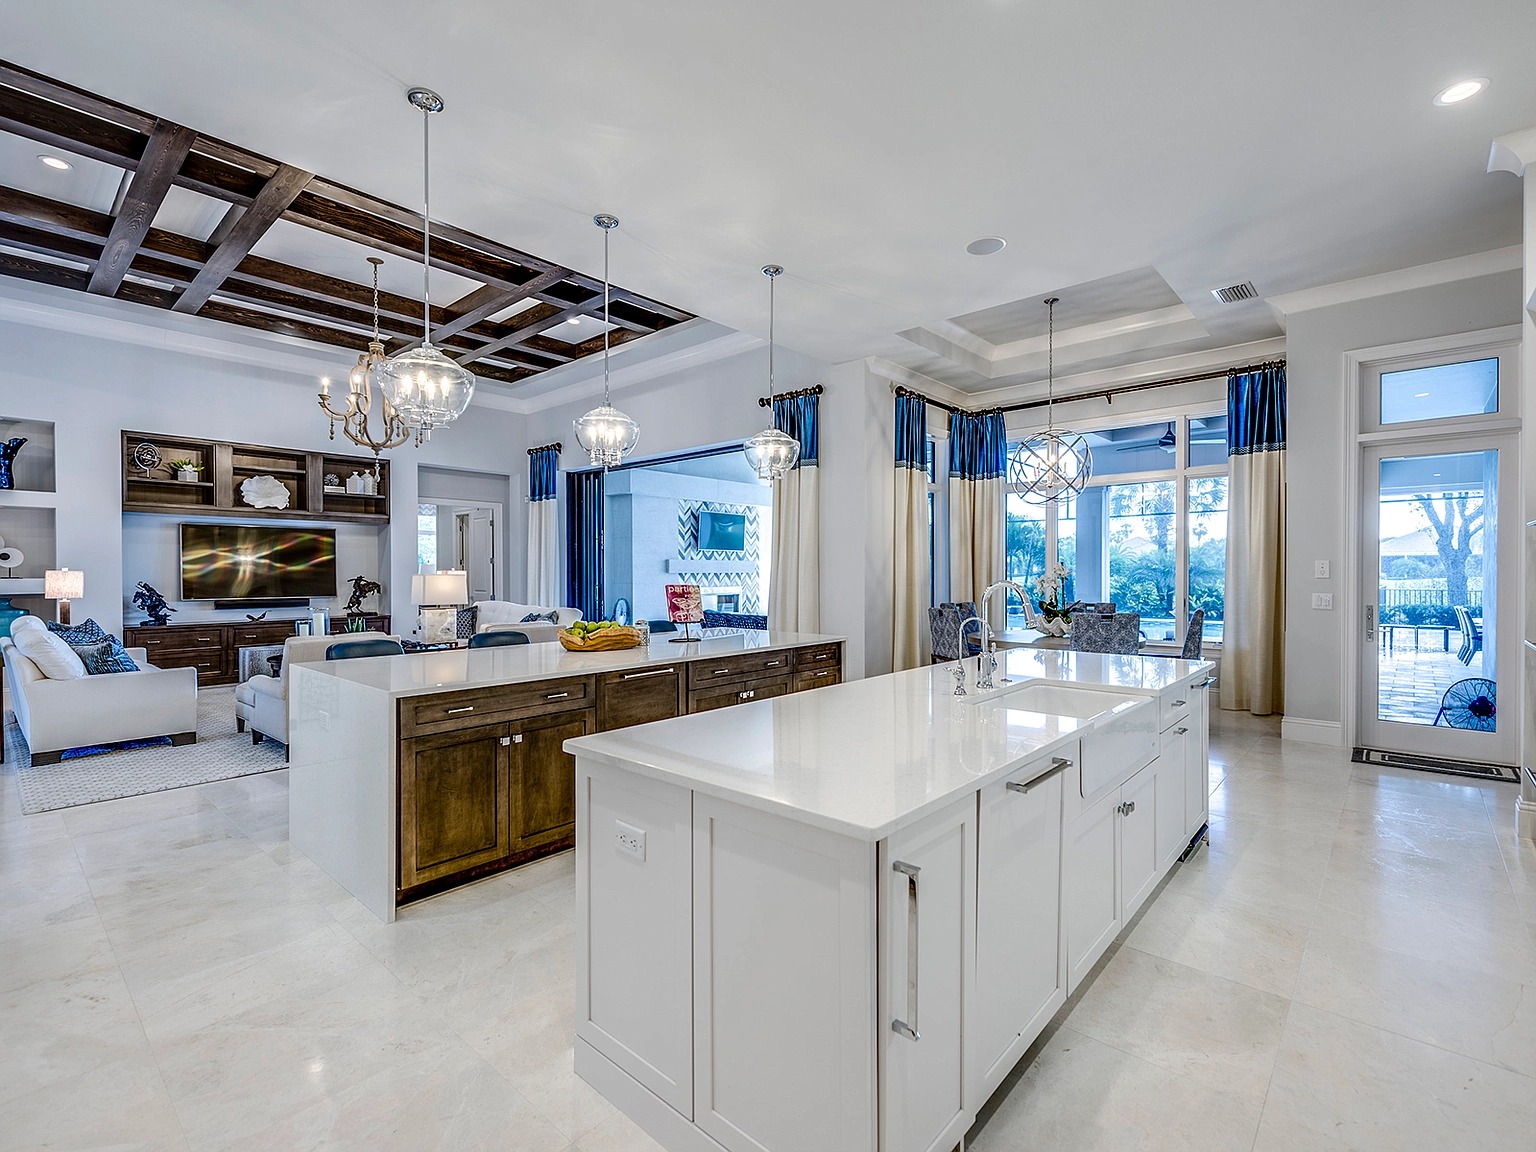 13970 Williston Way, Naples, FL 34119 - $3,195,000 home for sale, house images, photos and pics gallery